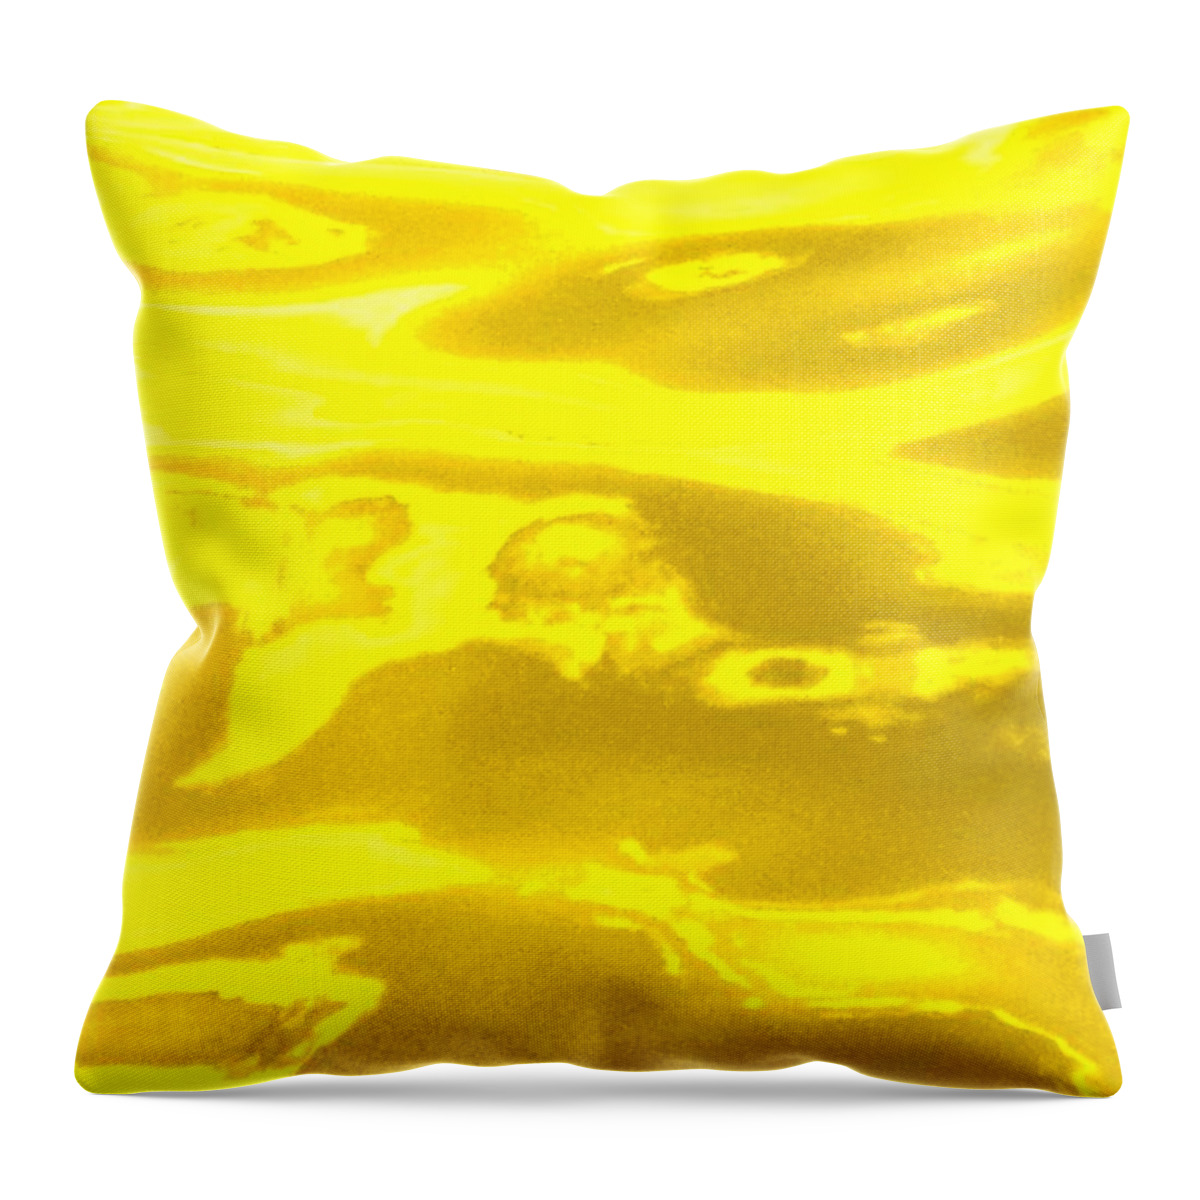 Multi Panel Throw Pillow featuring the photograph Colored Wave Yellow Panel Three by Stephen Jorgensen